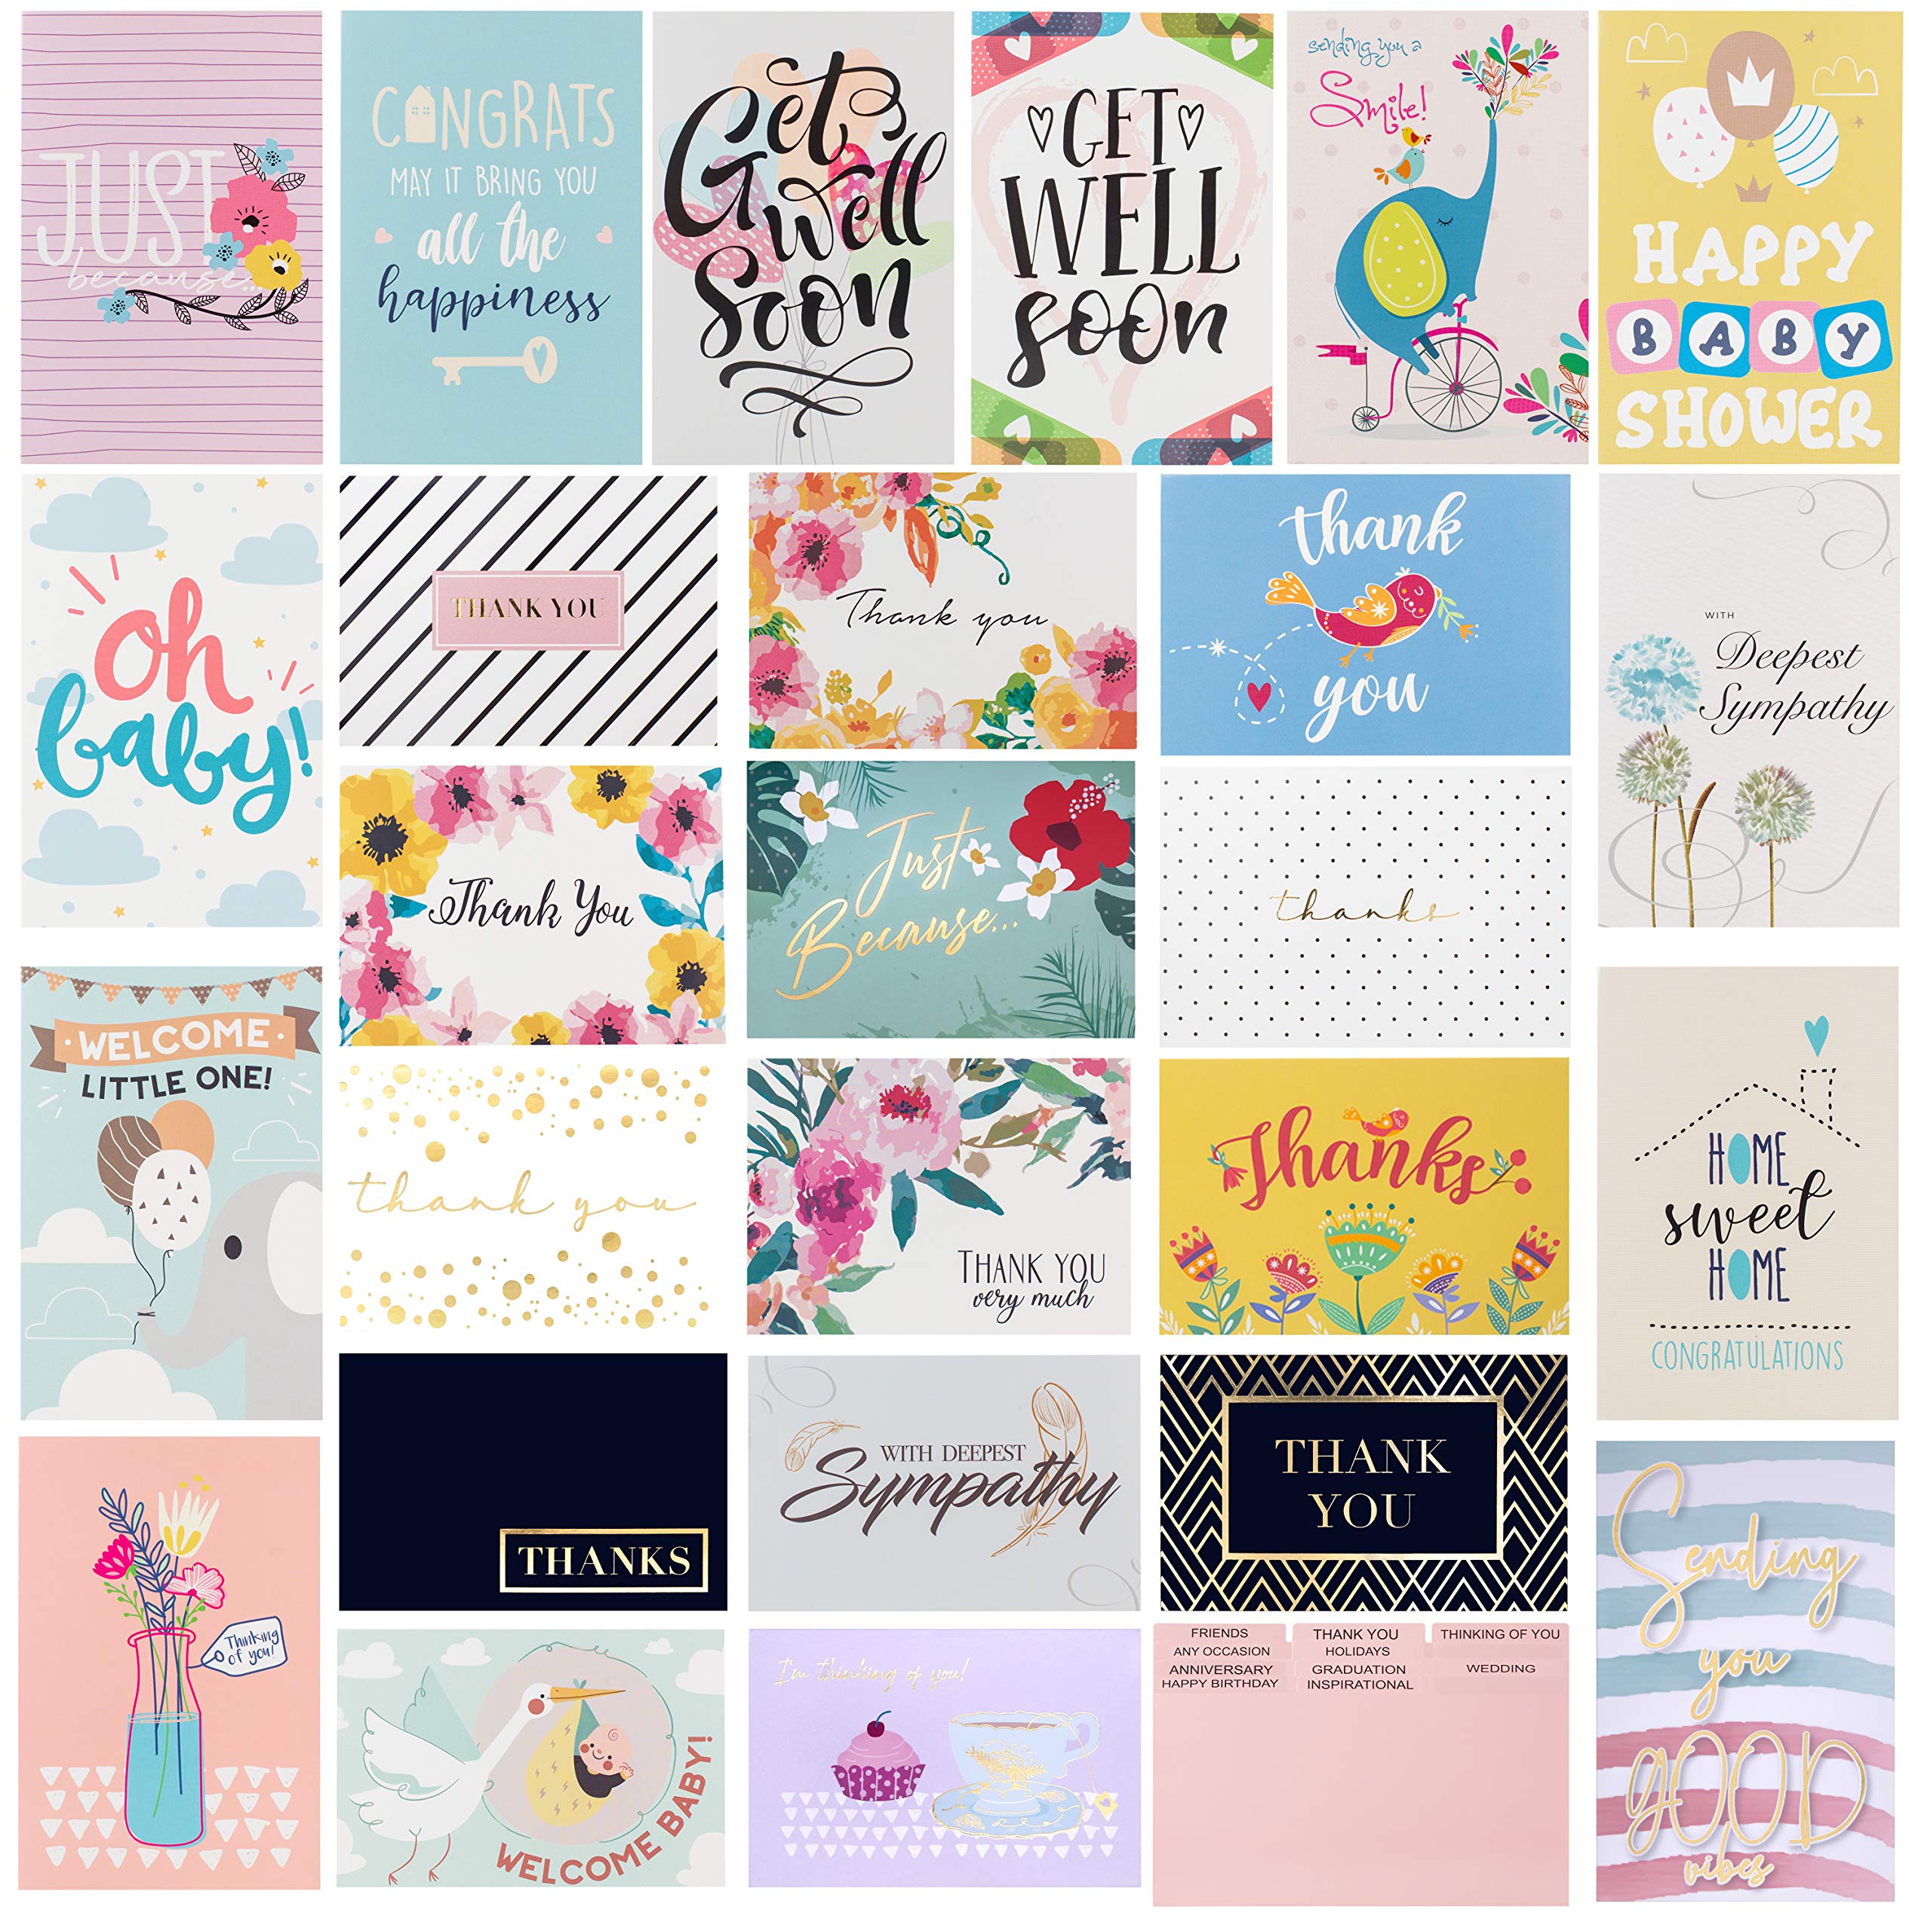 100 All Occasion Greeting Cards- 100 Eye Catching Designs with Greeting Card Organizer Box- Friendship Cards, Anniversary Cards, BFF Cards, Thanks Cards, Wedding Cards & More- 4 x 6 with 100 Envelopes